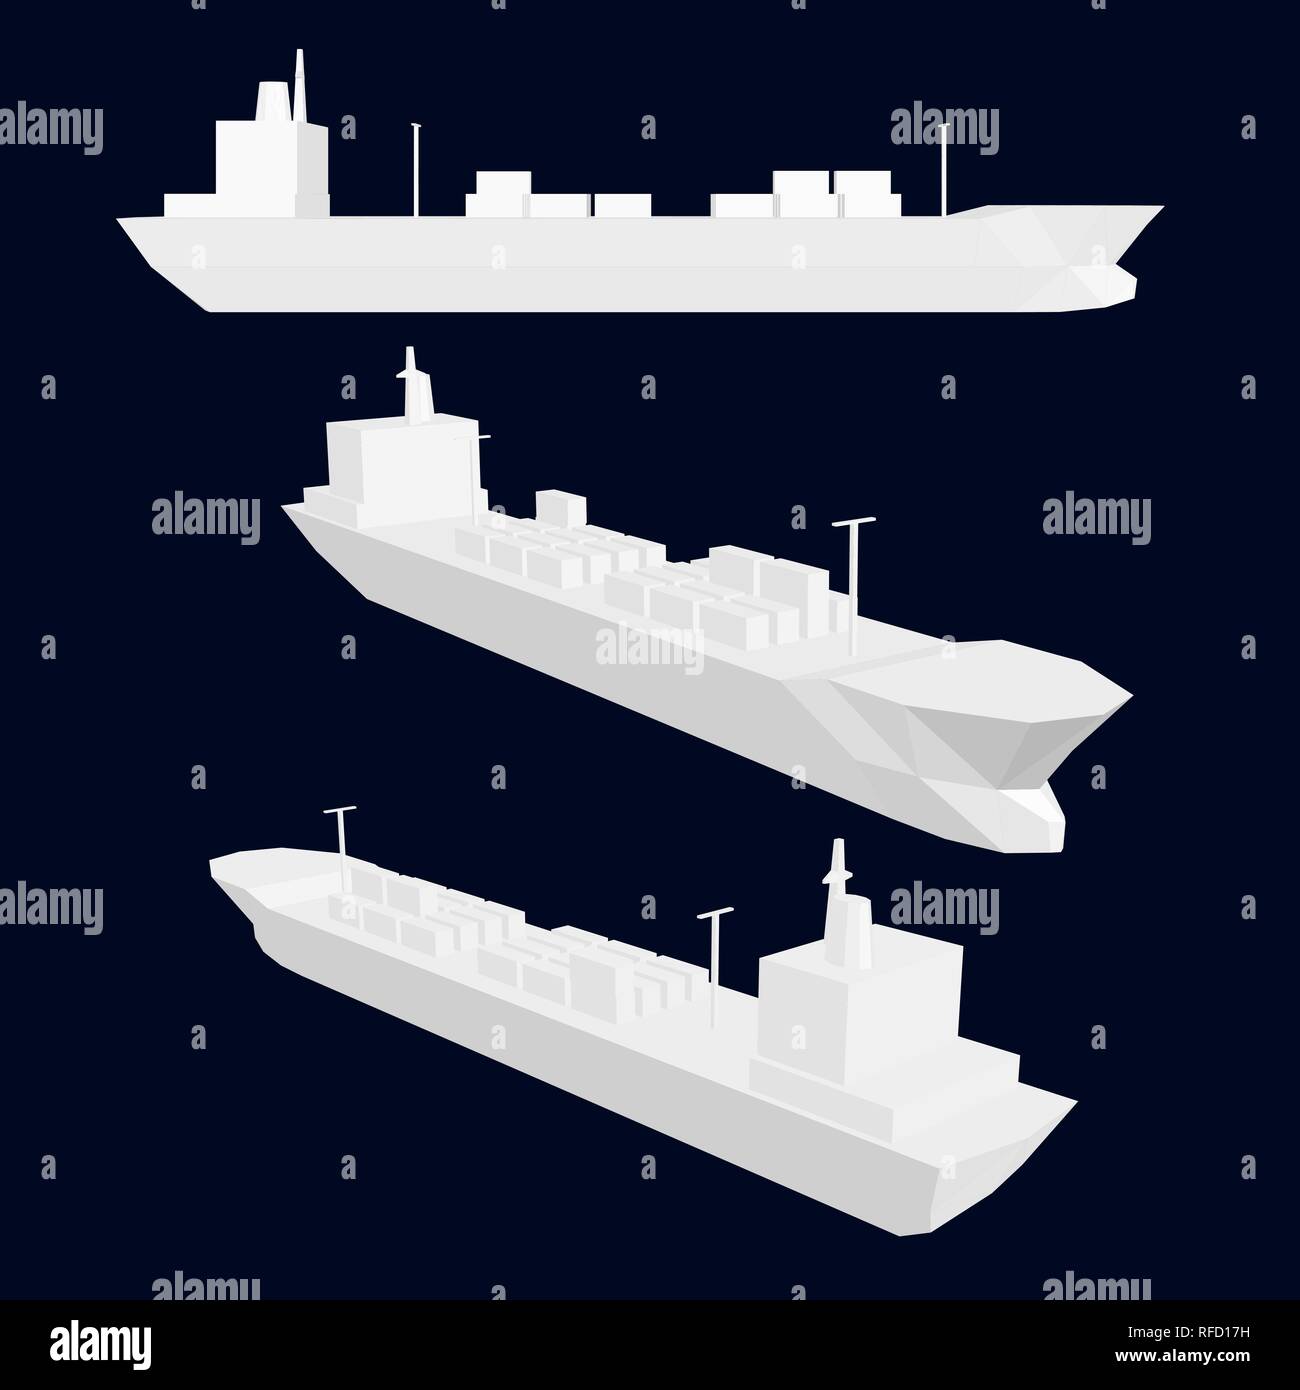 Set with tankers. Model tanker with containers in different positions. Vector illustration. Stock Vector